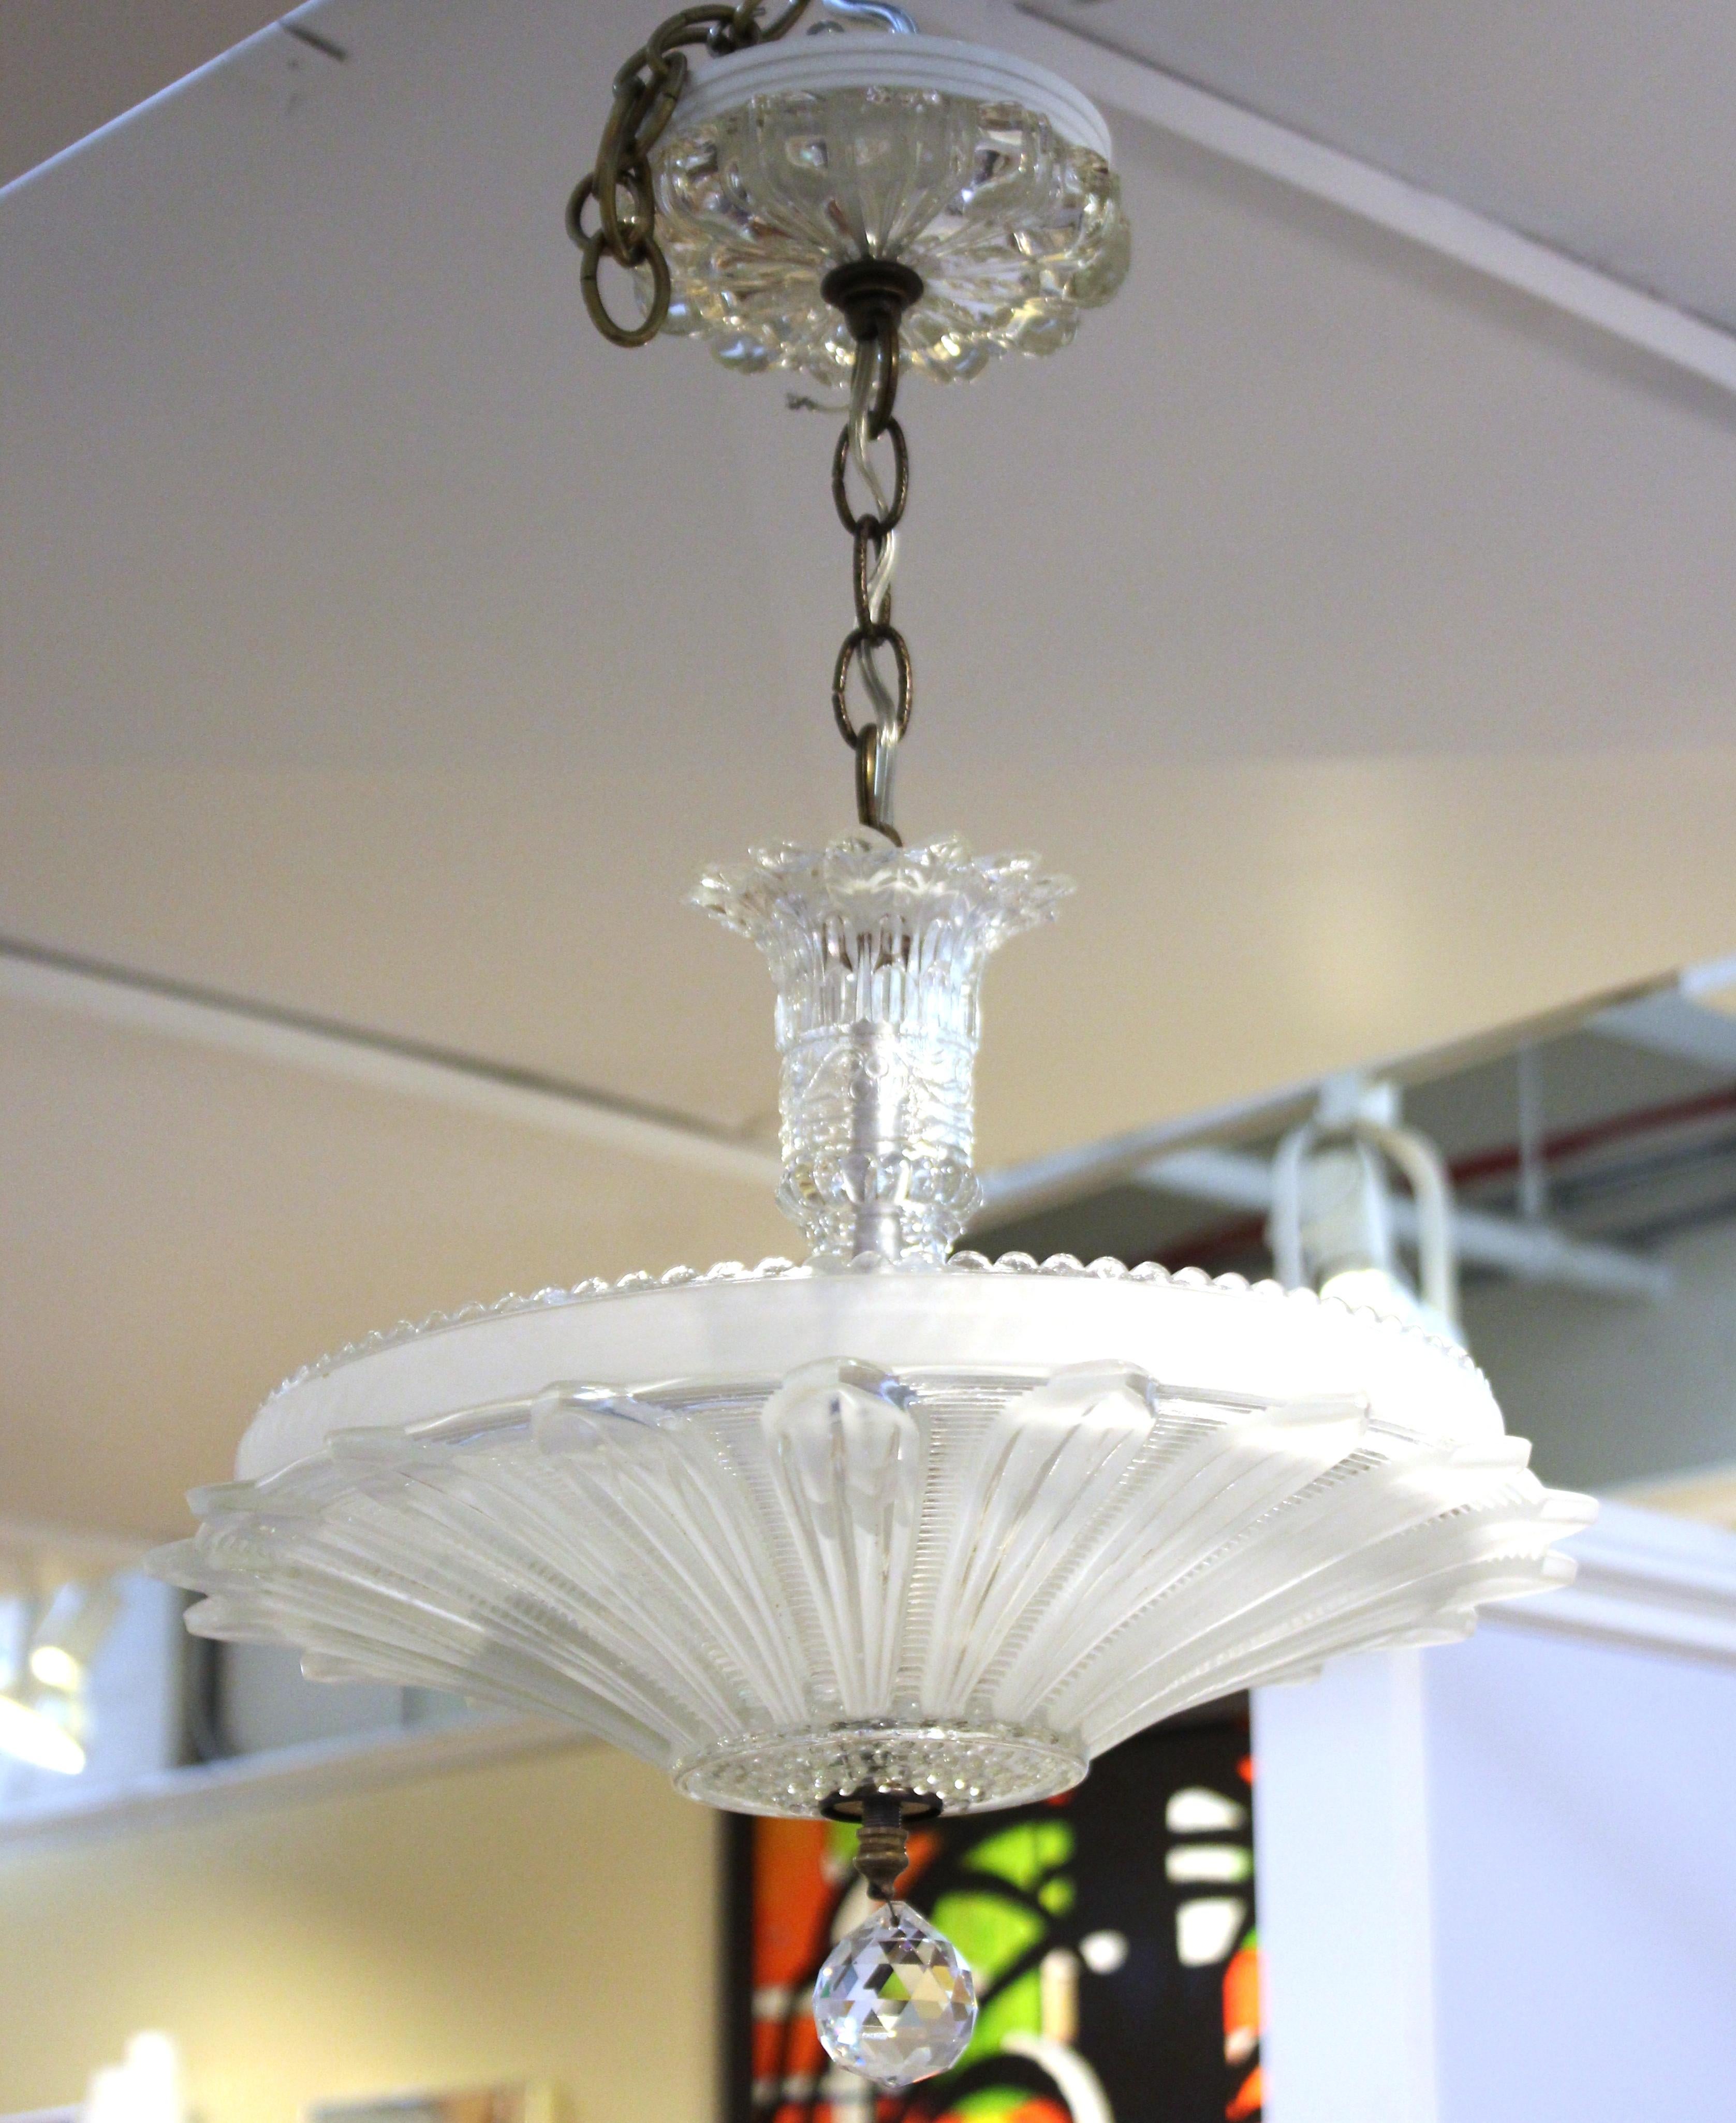 Art Deco period chandelier pendant in cut glass and crystal, made in Europe in the early to mid-20th century. The piece is in great vintage condition with age-appropriate wear and patina to the metal chain.